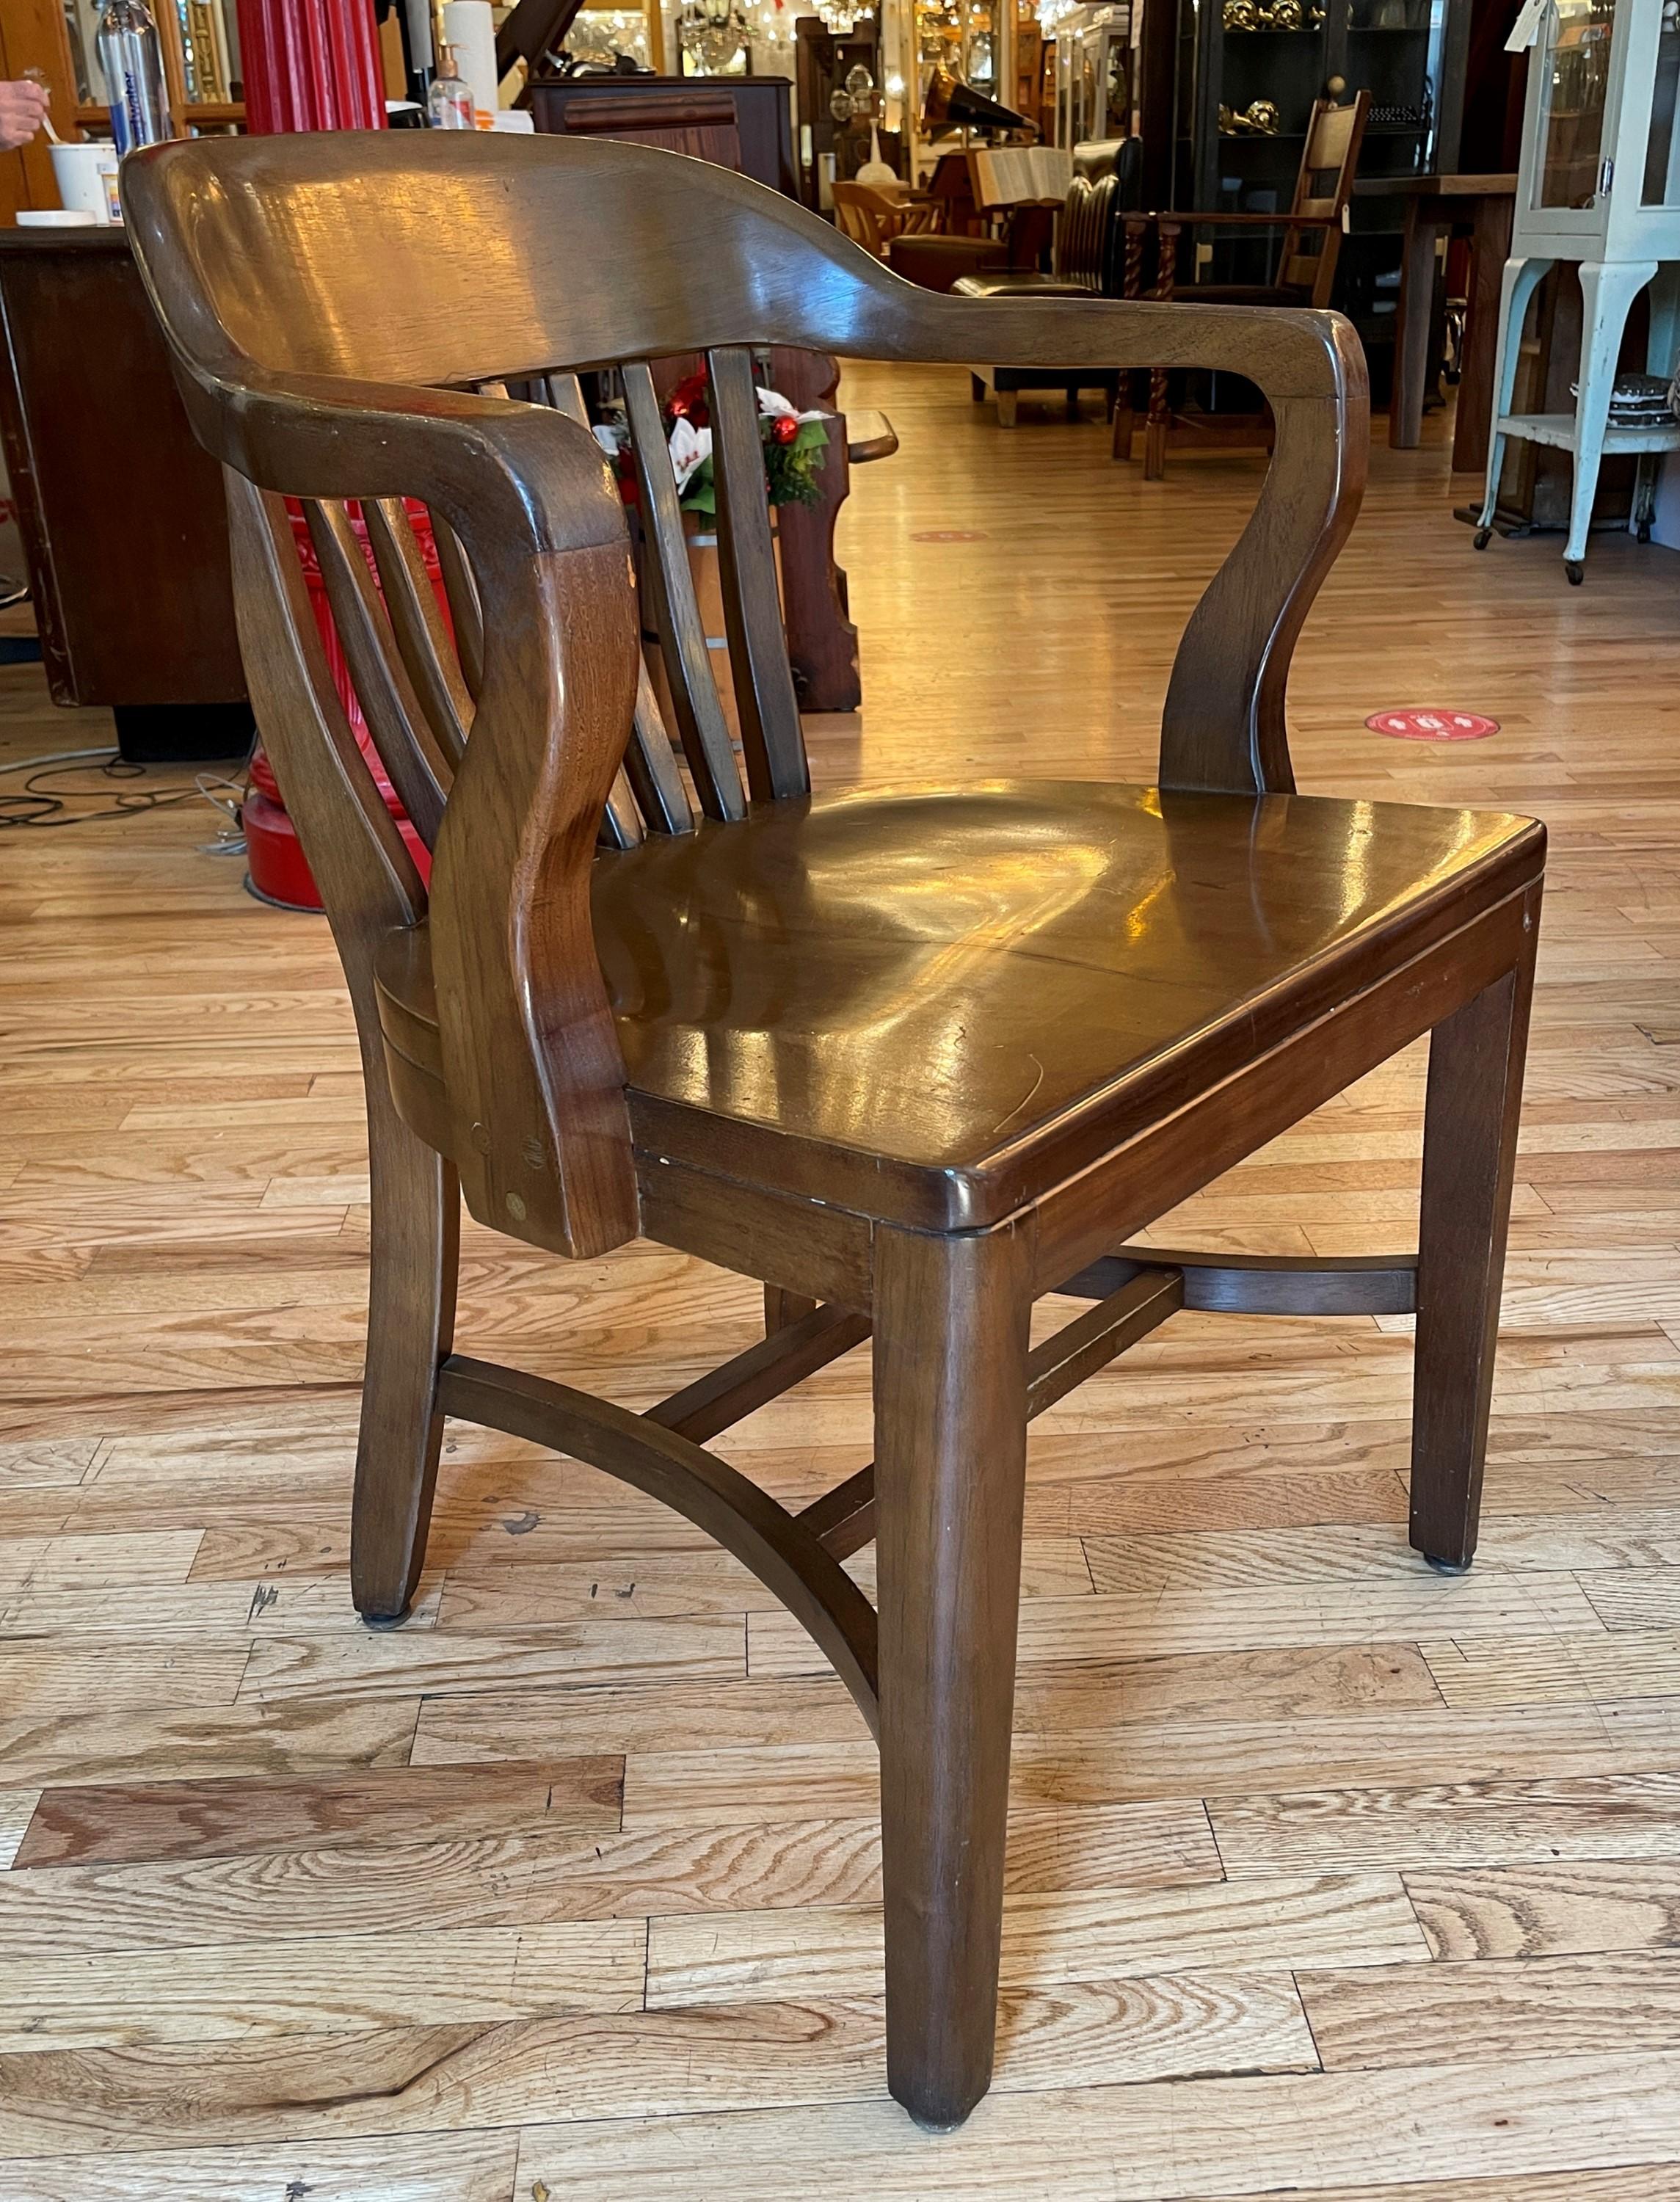 This solid walnut bankers chair with birch stain is made in a Bank of England style and exudes sophistication, with its rich wood finish, ergonomic design, and historical significance. Please note, this item is located in one of our NYC locations.